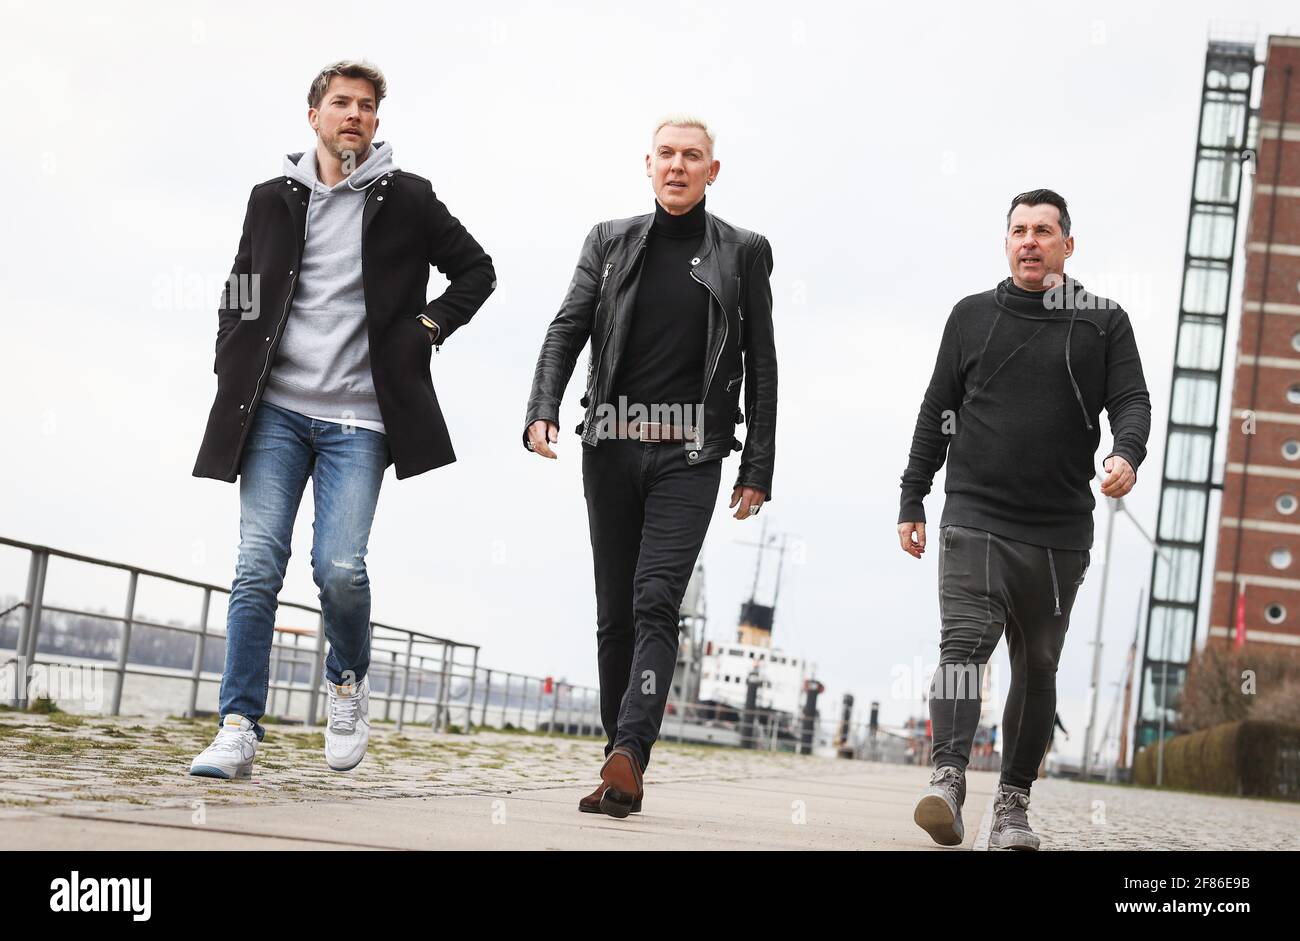 Hamburg, Germany. 09th Apr, 2021. H.P. Baxxter (M), frontman and singer of  the band Scooter, and his band members Sebastian Schilde (l) and Michael  Simon at a photo session after an interview